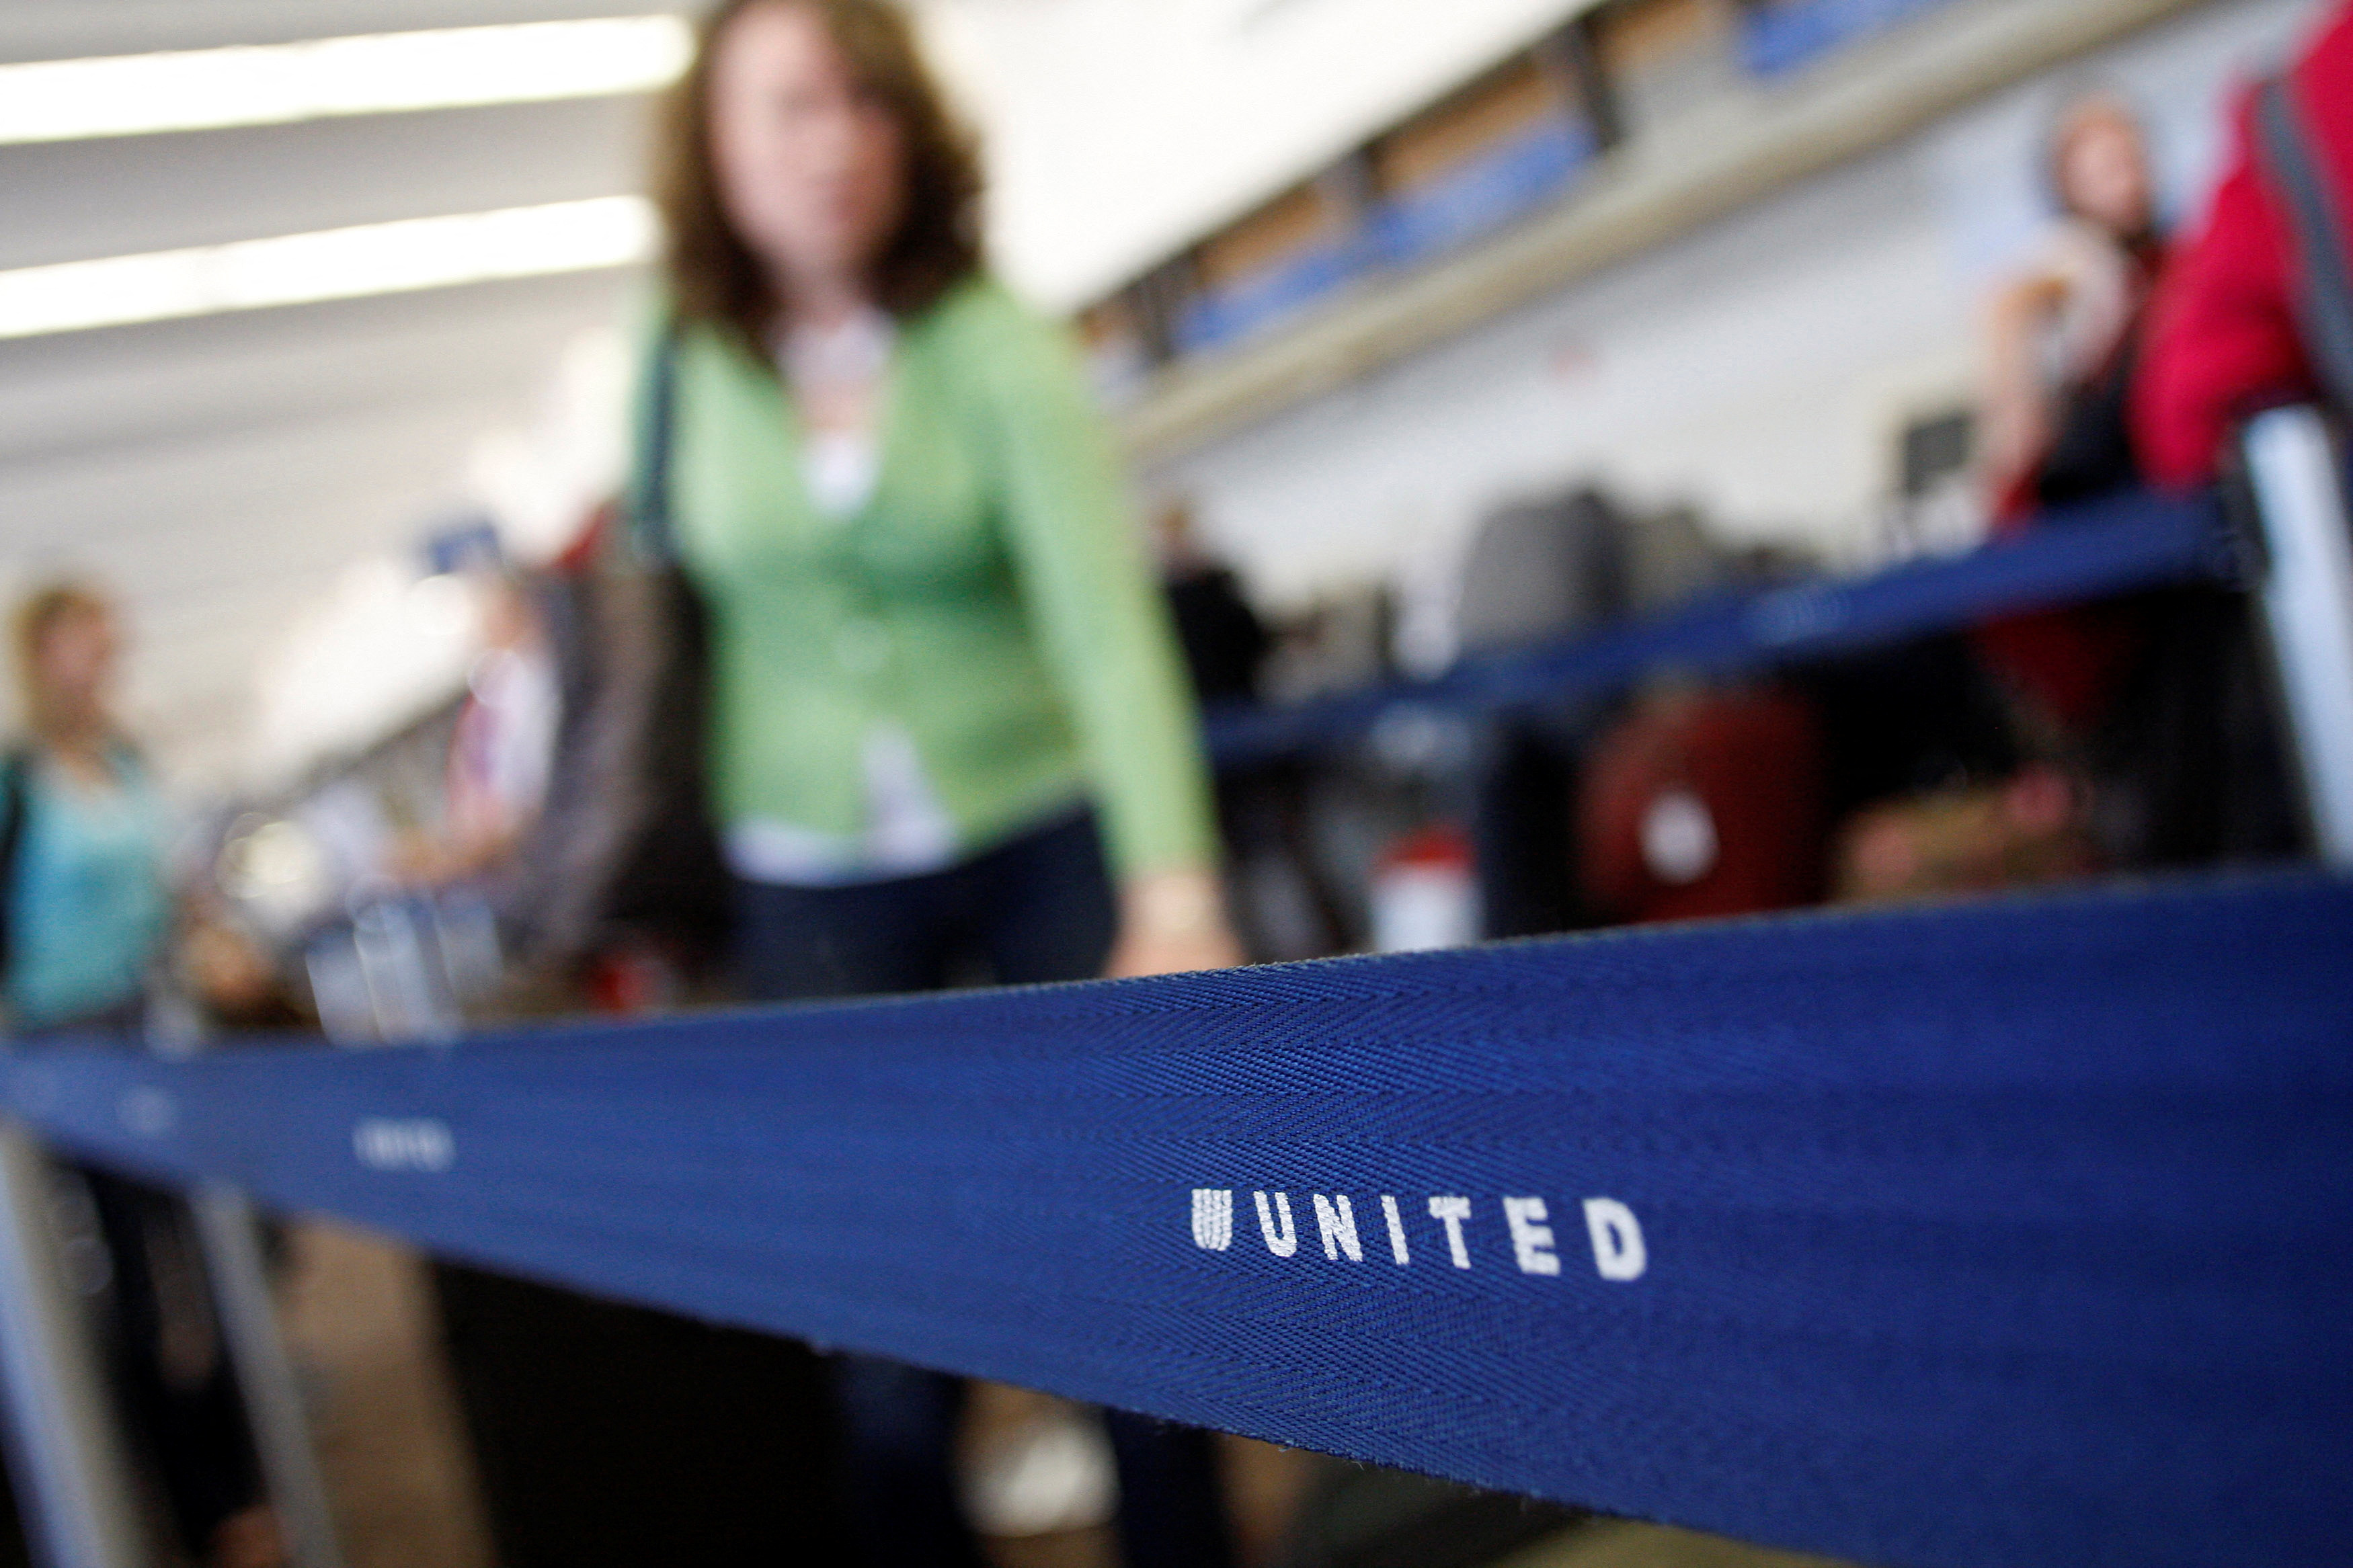 Passengers wait to check-in at the United Airlines ticket counter at Phoenix Sky Harbor International Airport